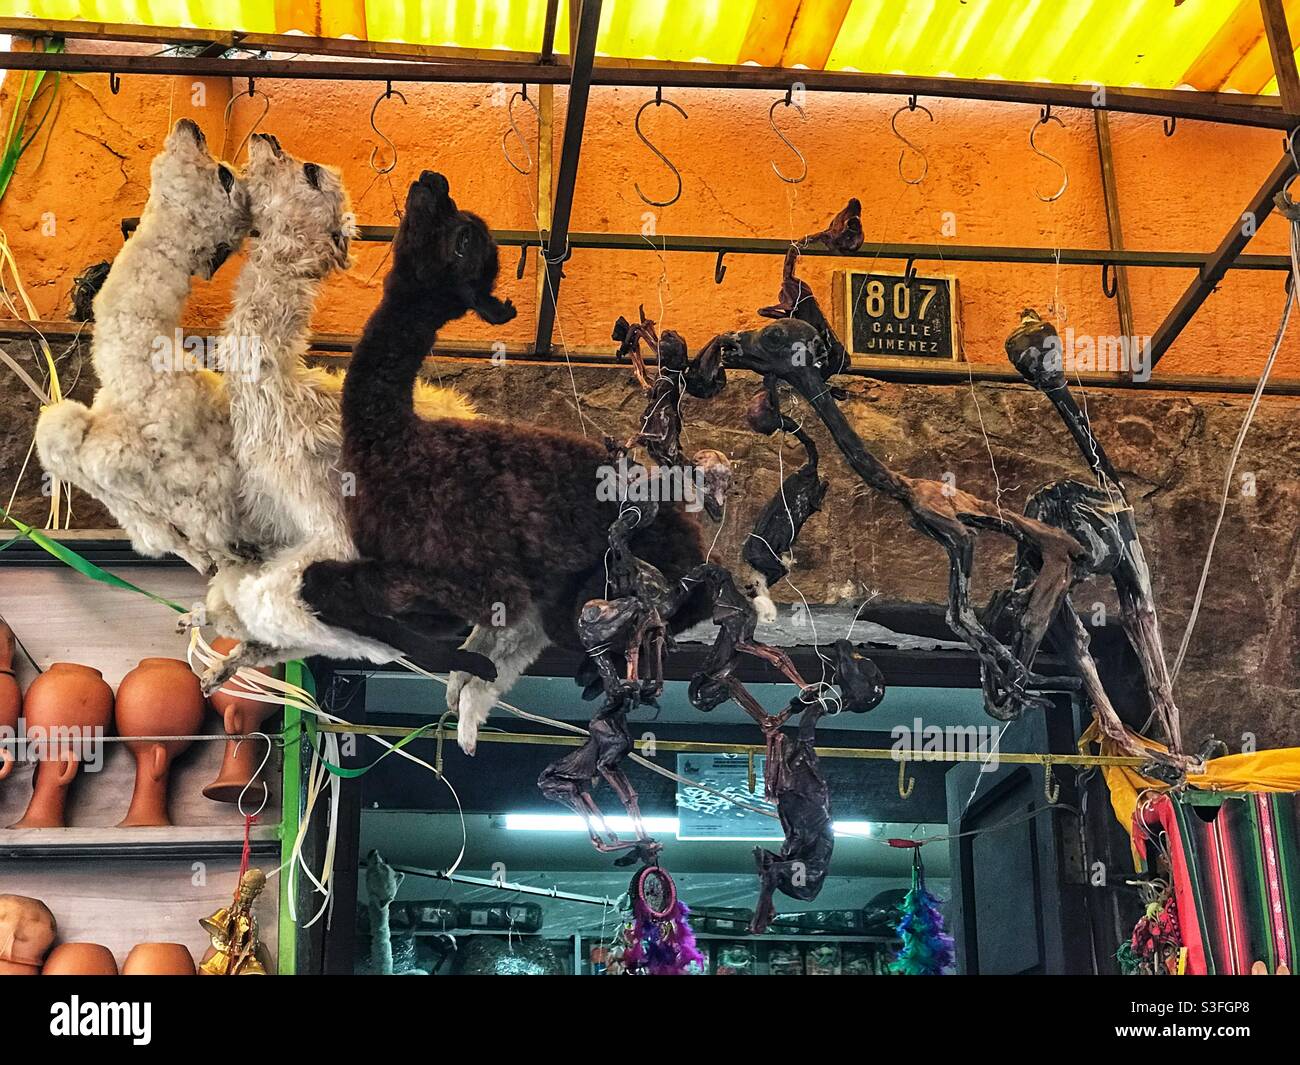 Llama fetuses in the Witches Market in La Paz, Bolivia Stock Photo